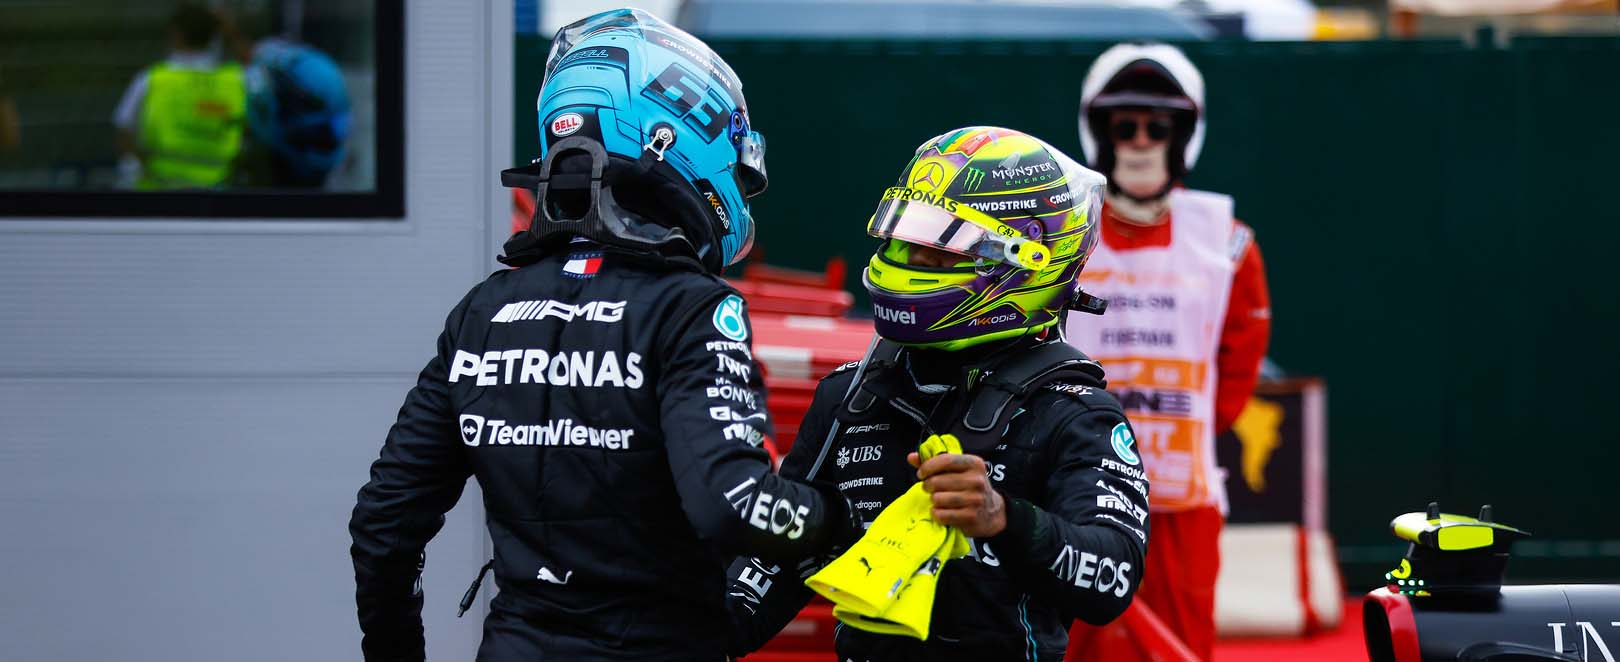 Lewis Hamilton and George Russell celebrating a double Mercedes podium at the Spanish Grand Prix